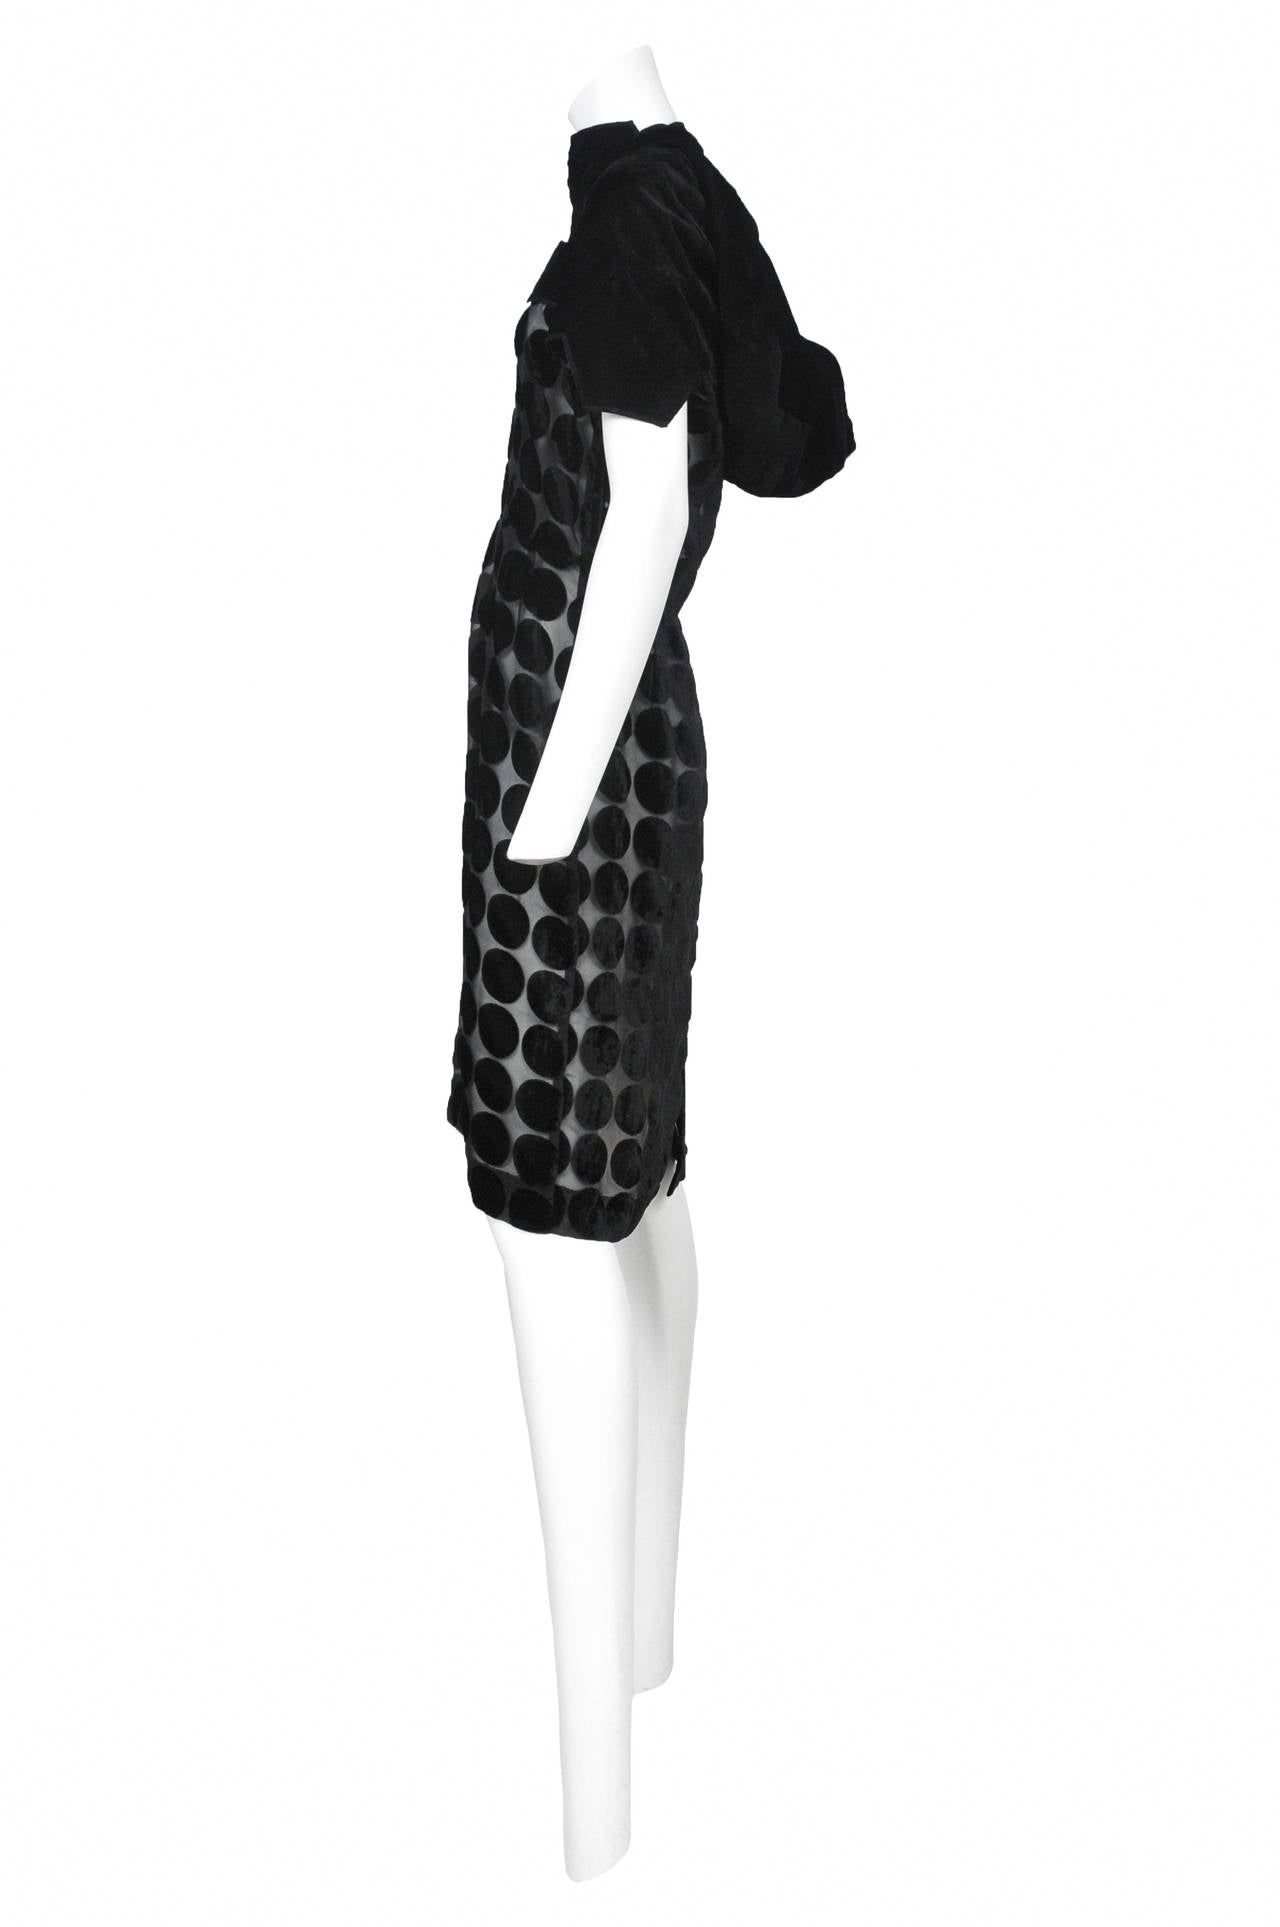 Vintage Junya black velvet and chiffon dress featuring an all over polka dot design, and velvet patch work around the shoulders and hood. From the Spring 2009 Collection.